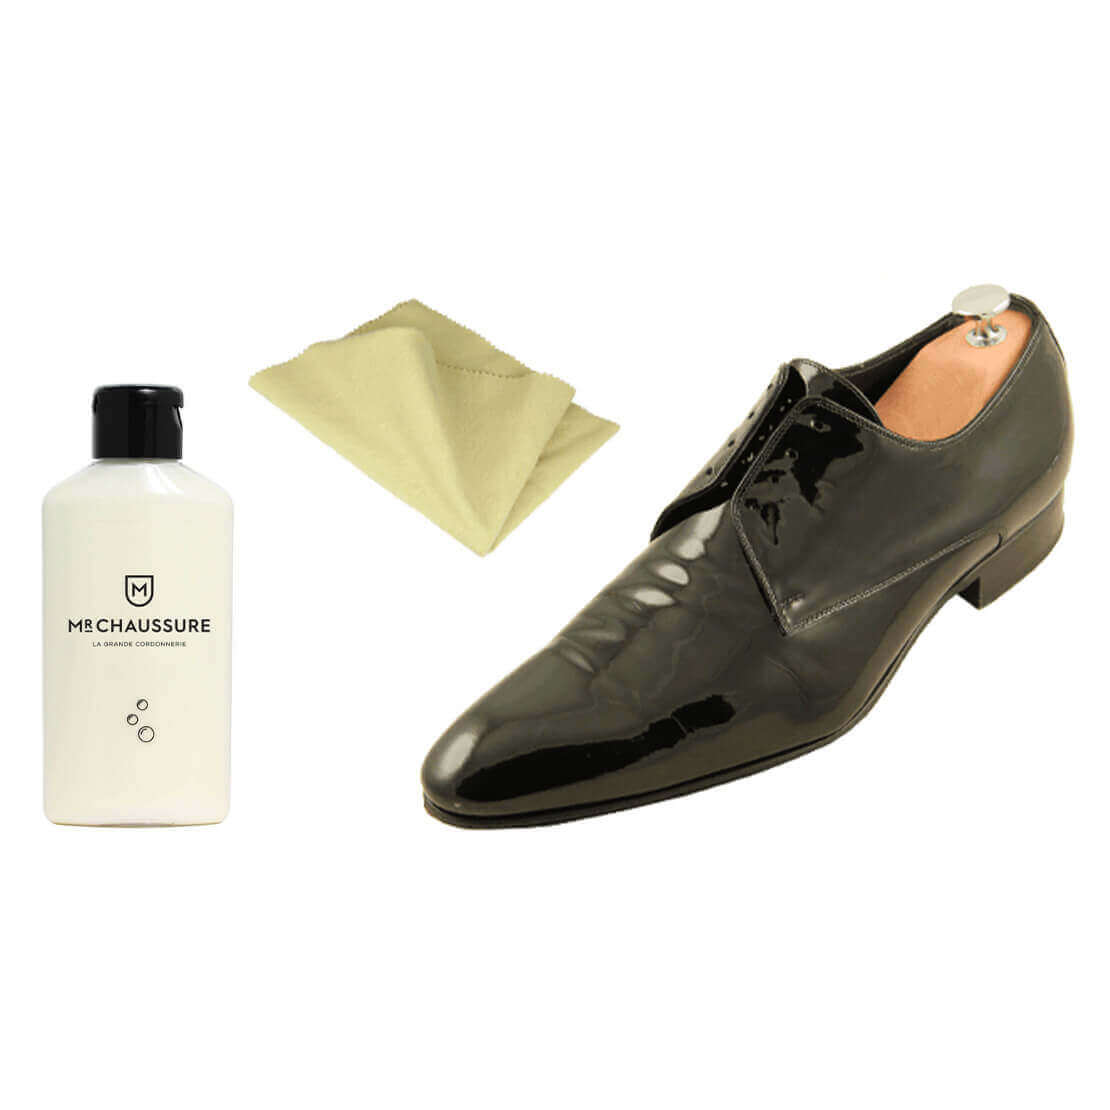 How To Clean Patent Leather - Properly and Easily